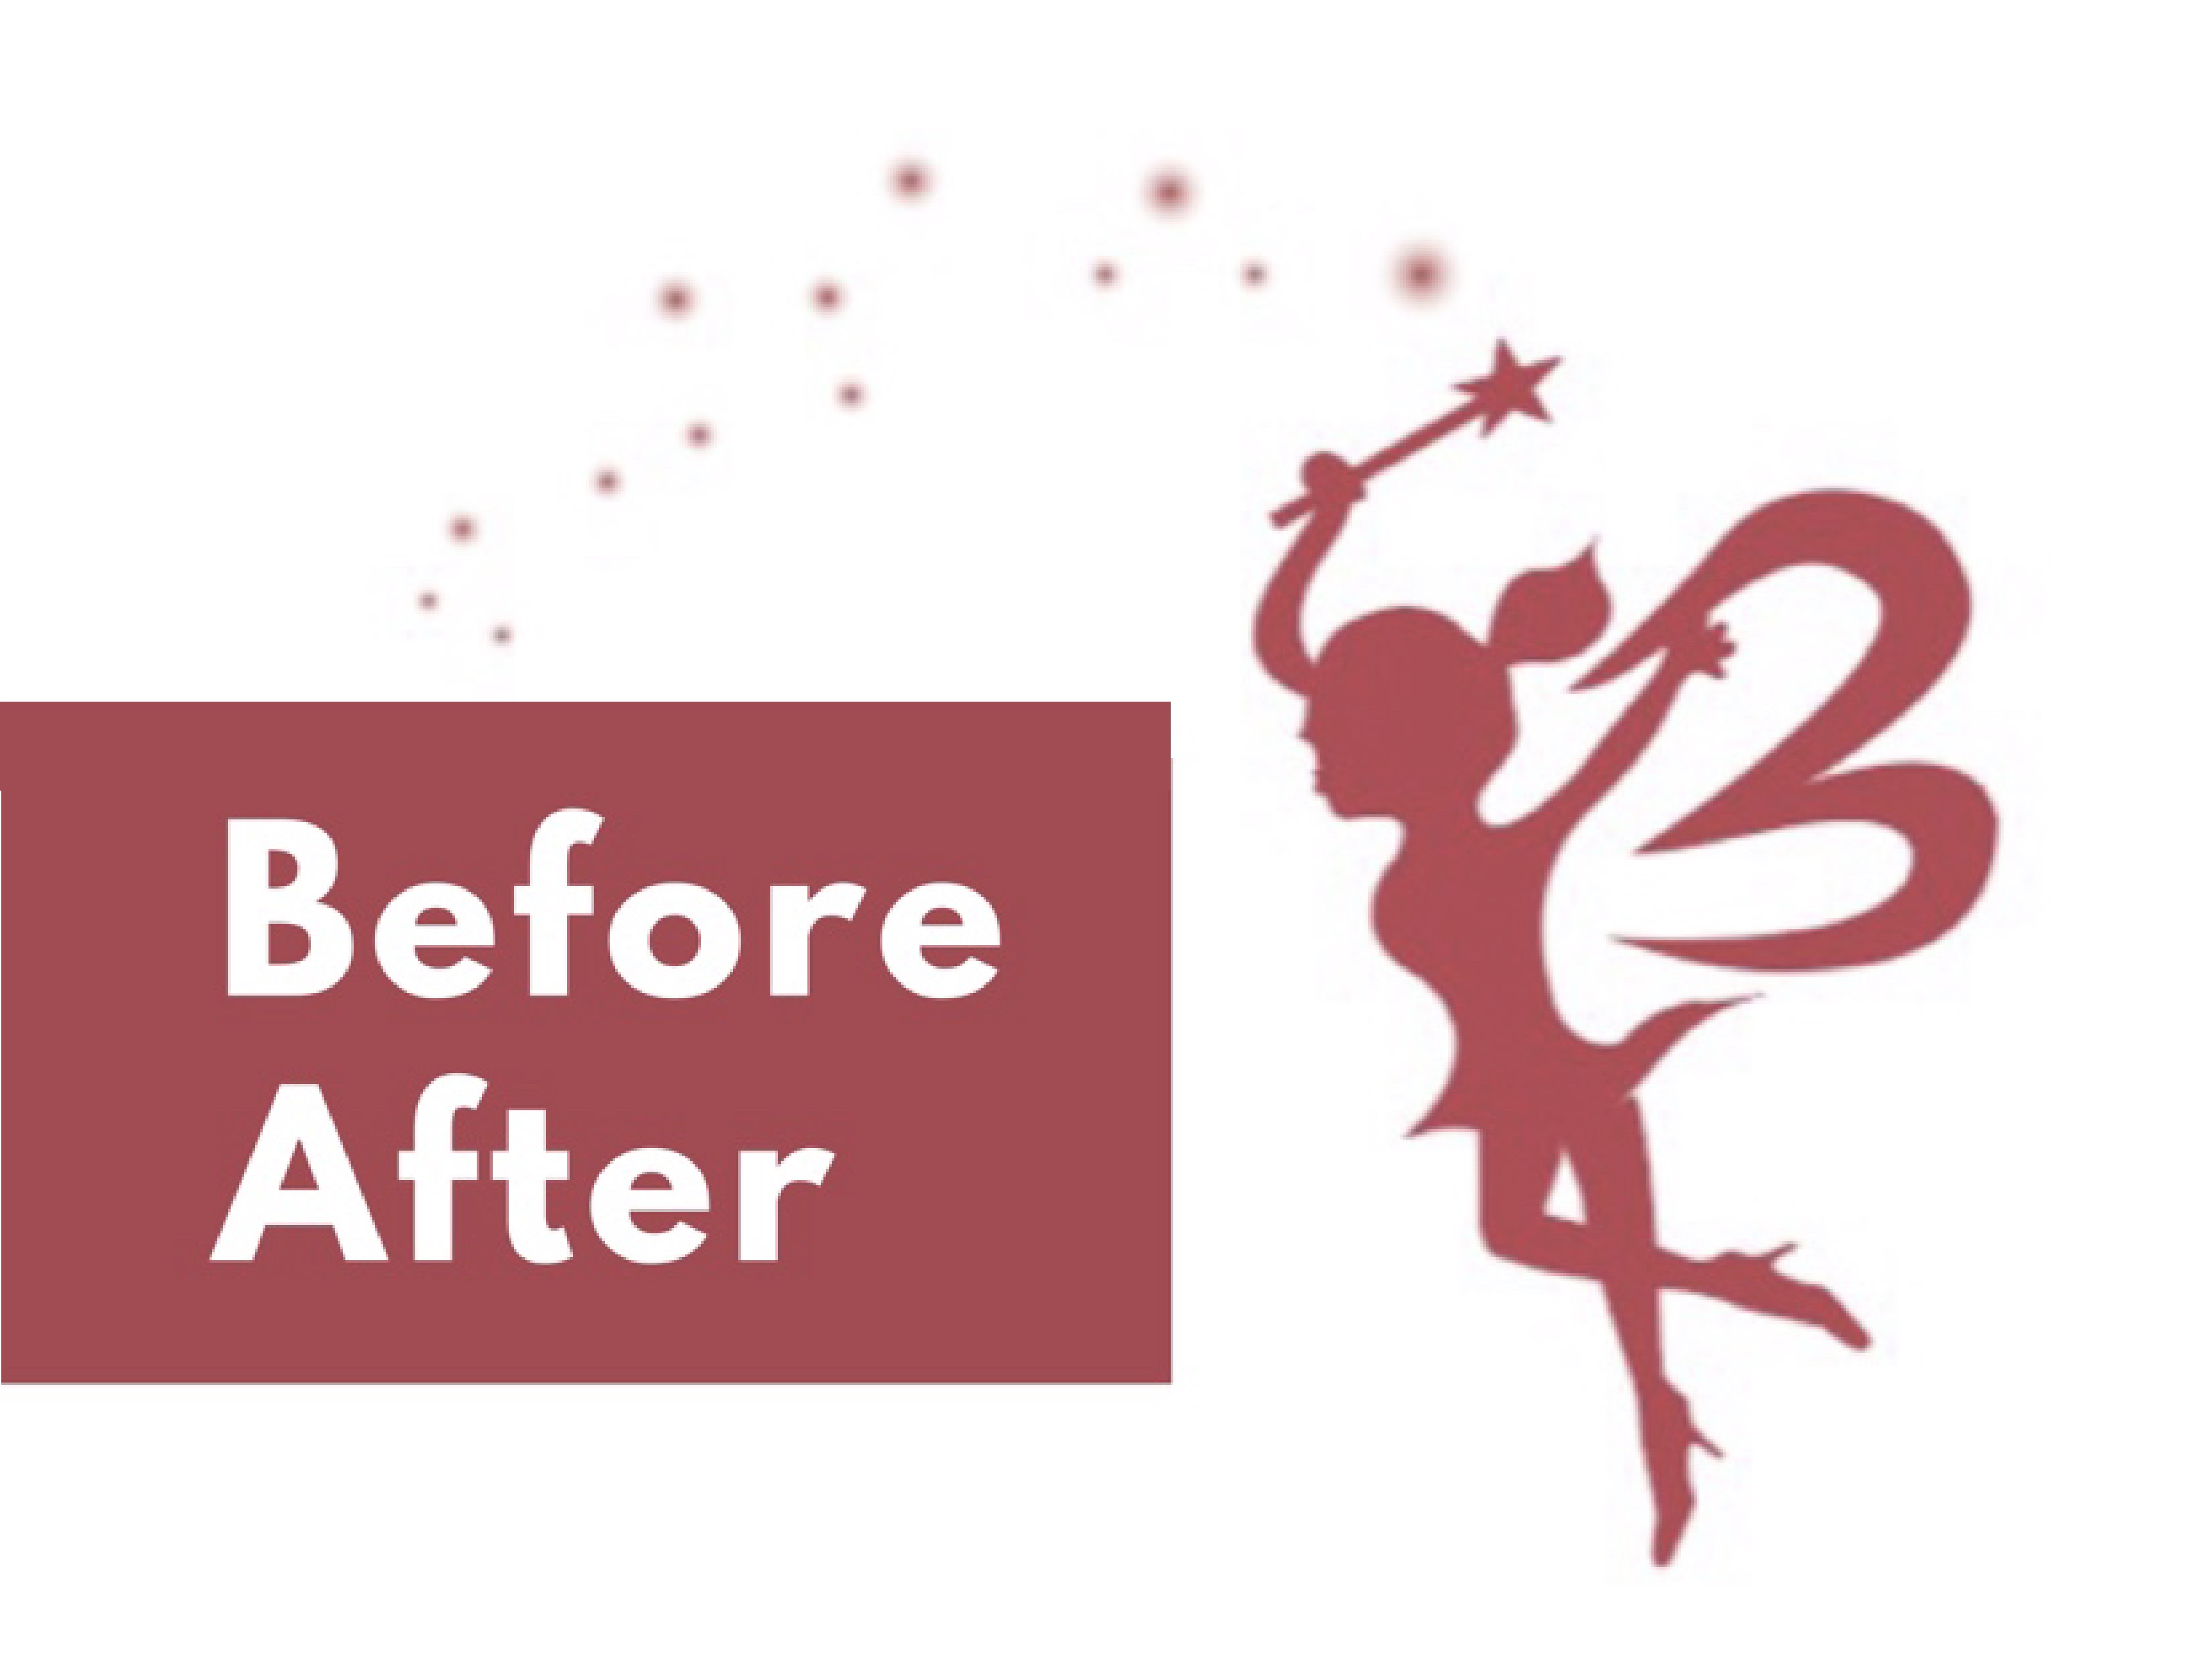 Before after 3